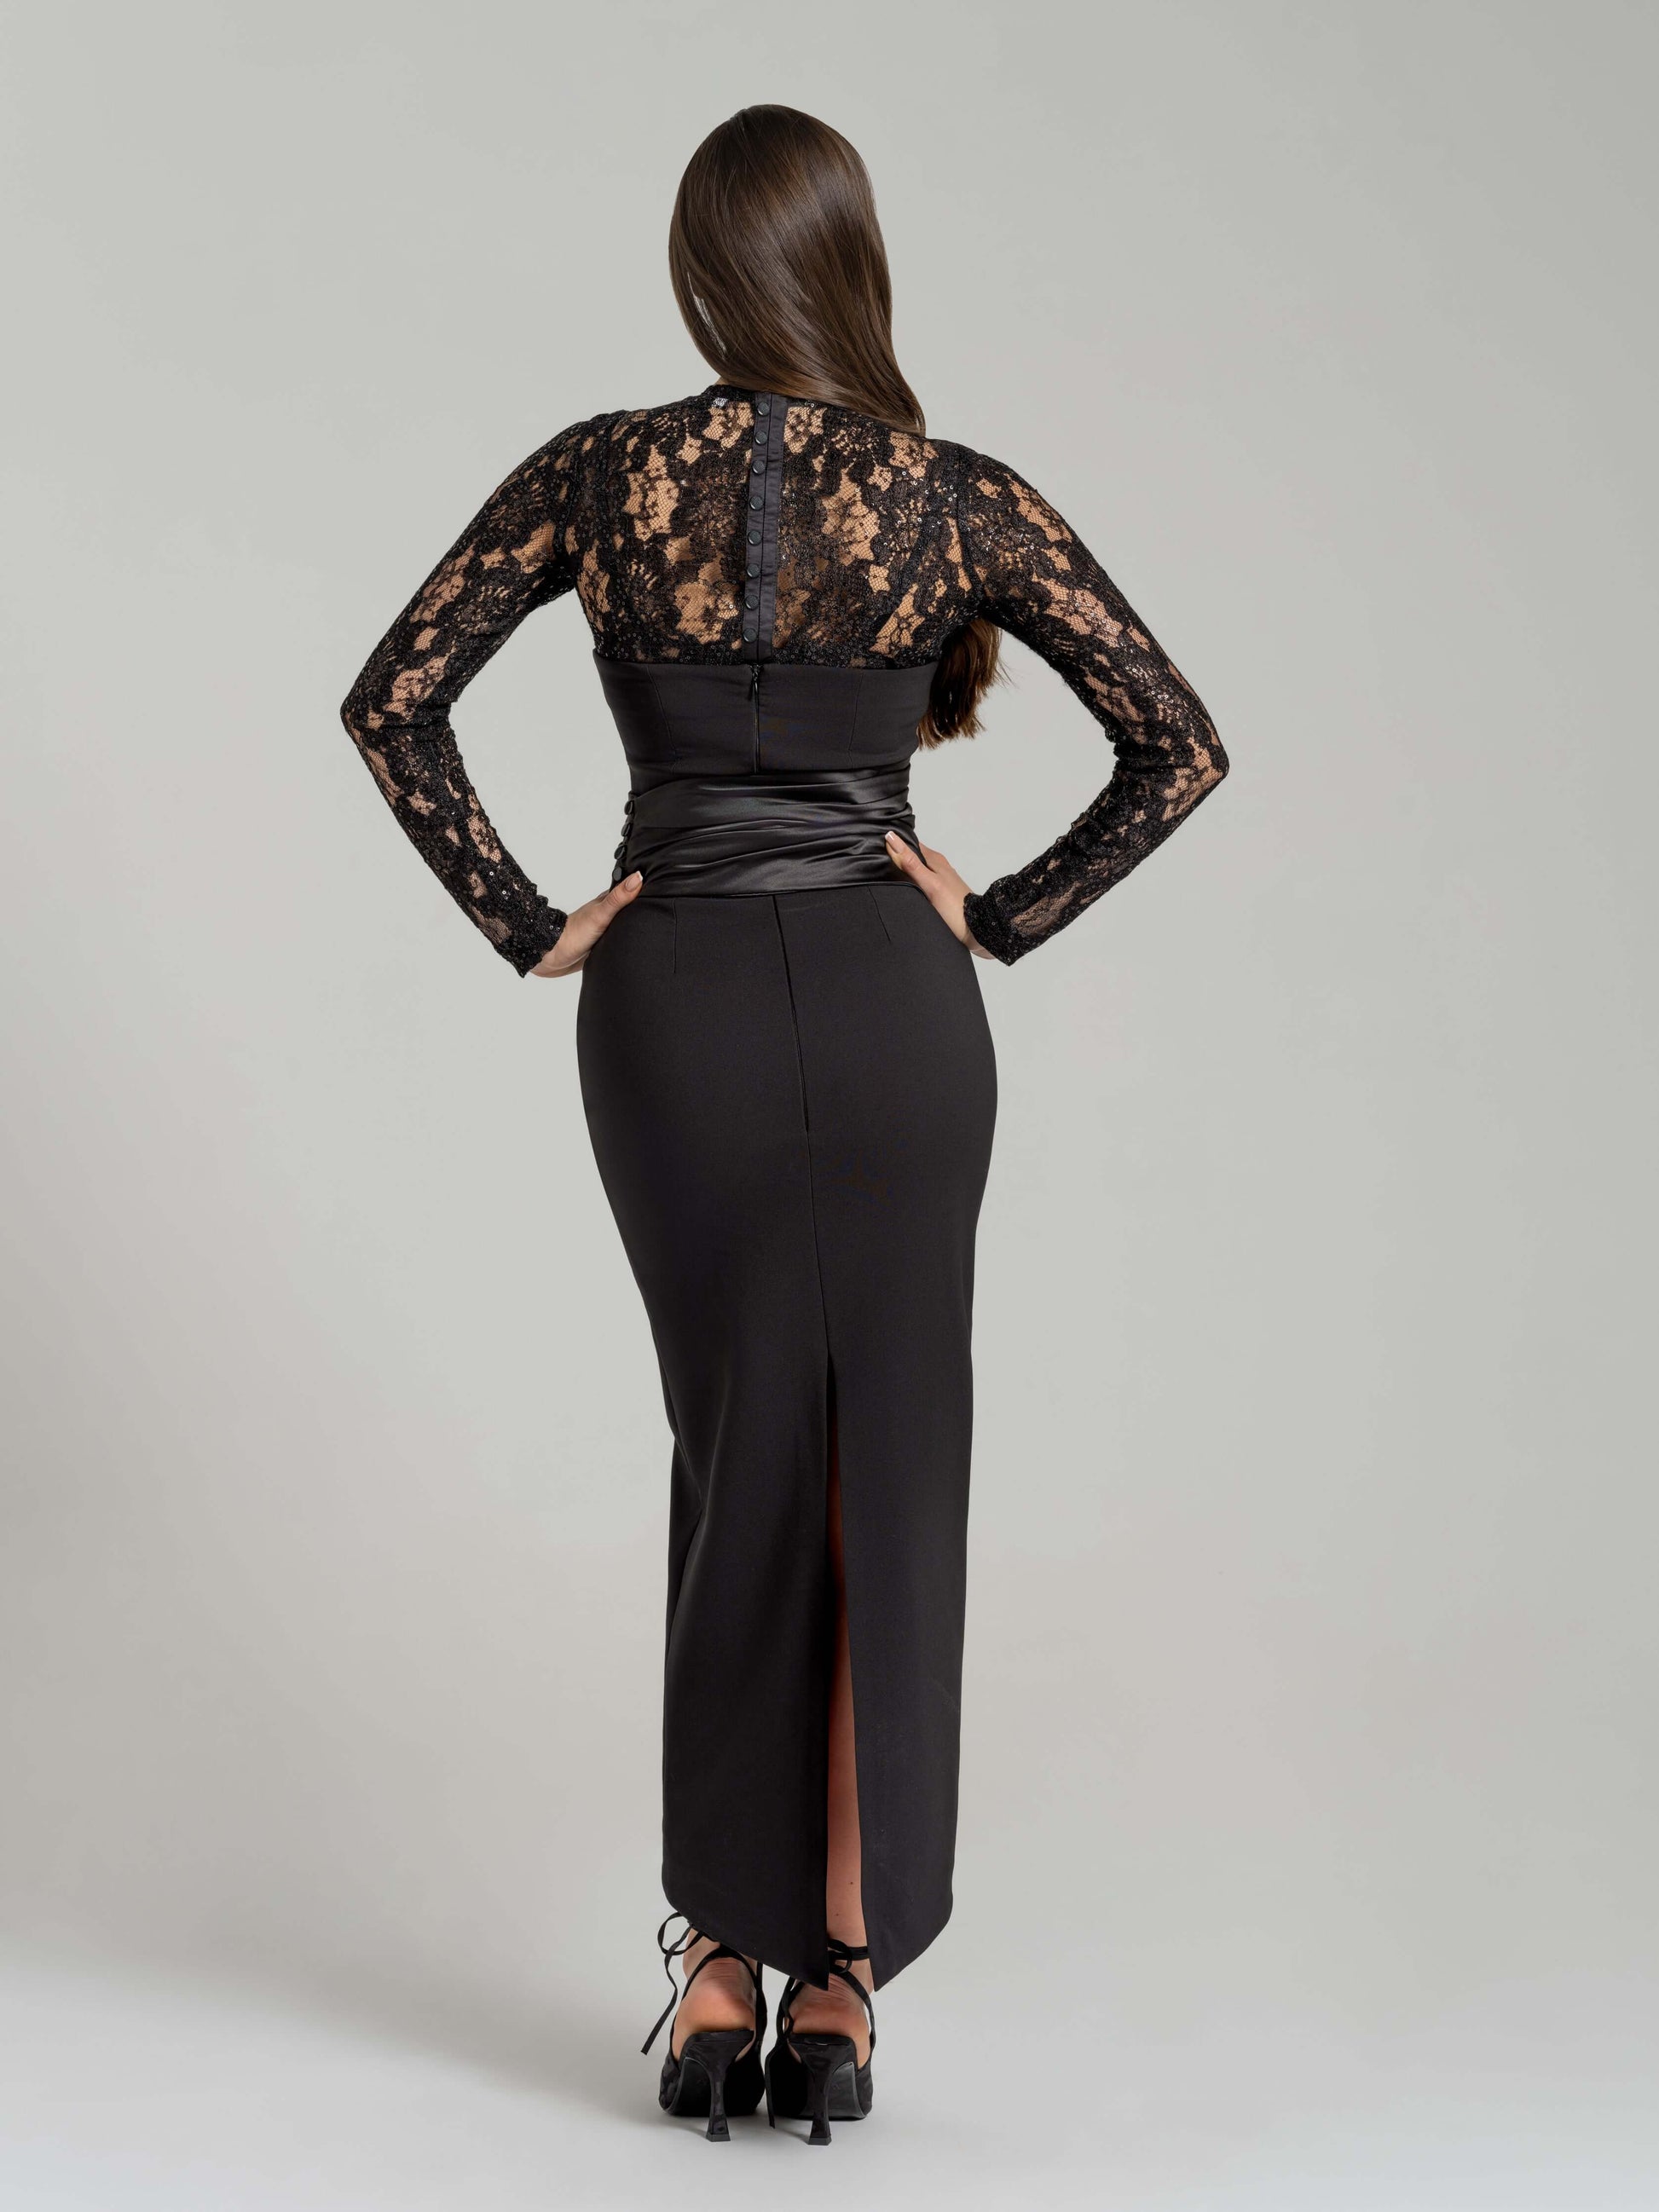 Closer to Love Midi Dress with Lace Top by Tia Dorraine Women's Luxury Fashion Designer Clothing Brand